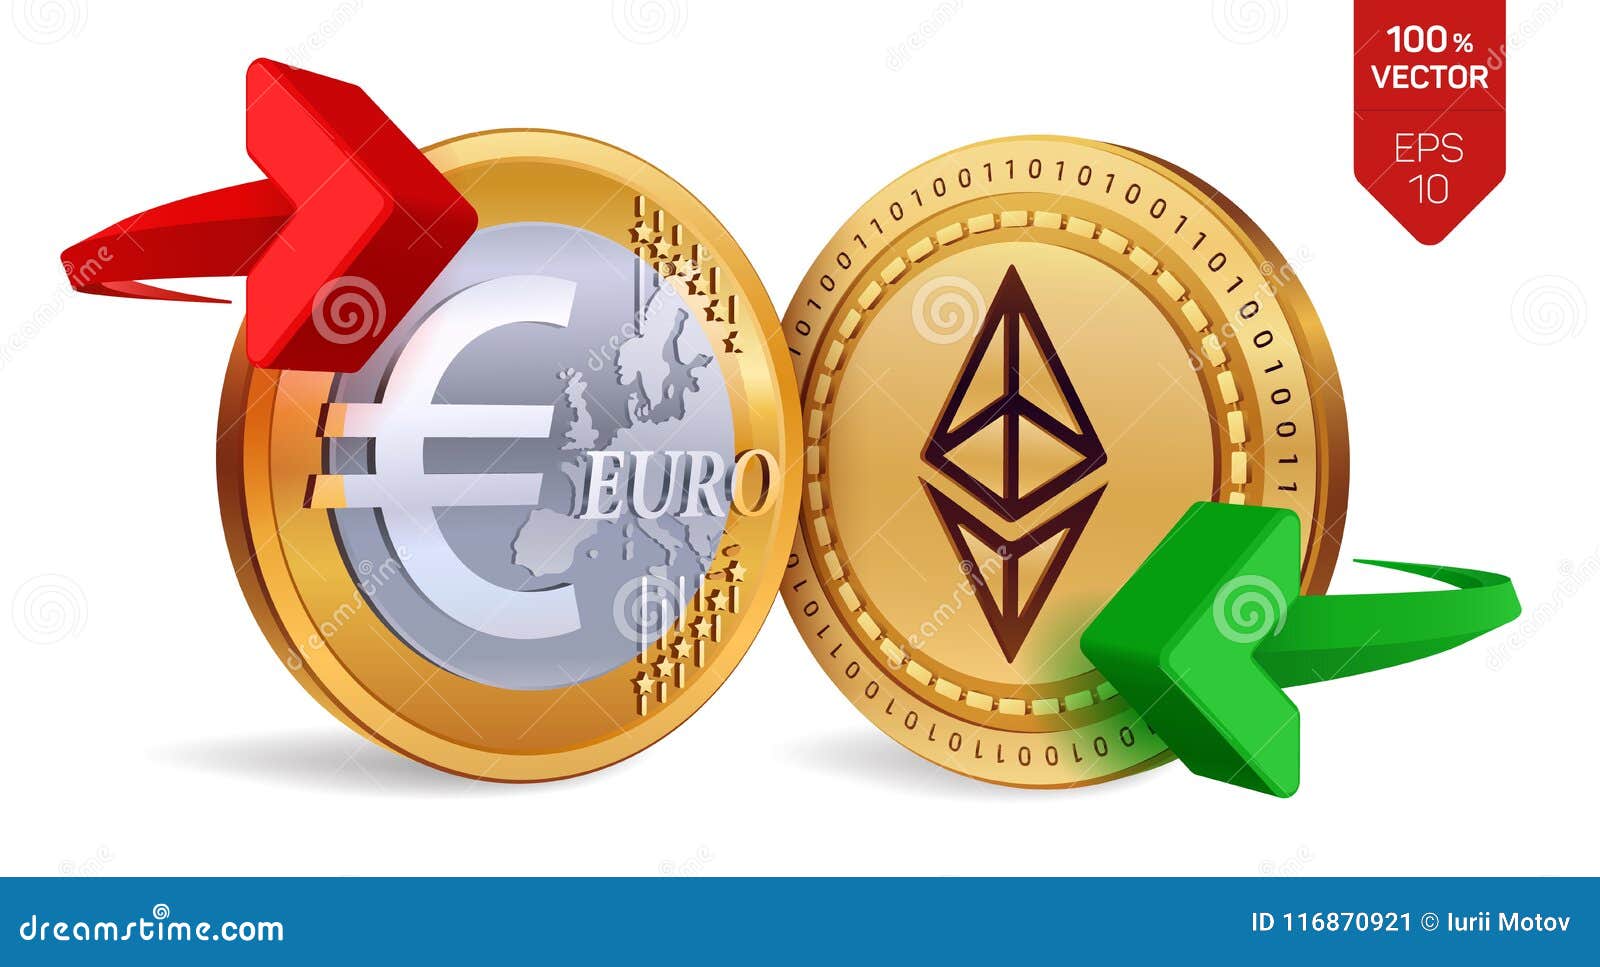 euro coin cryptocurrency)